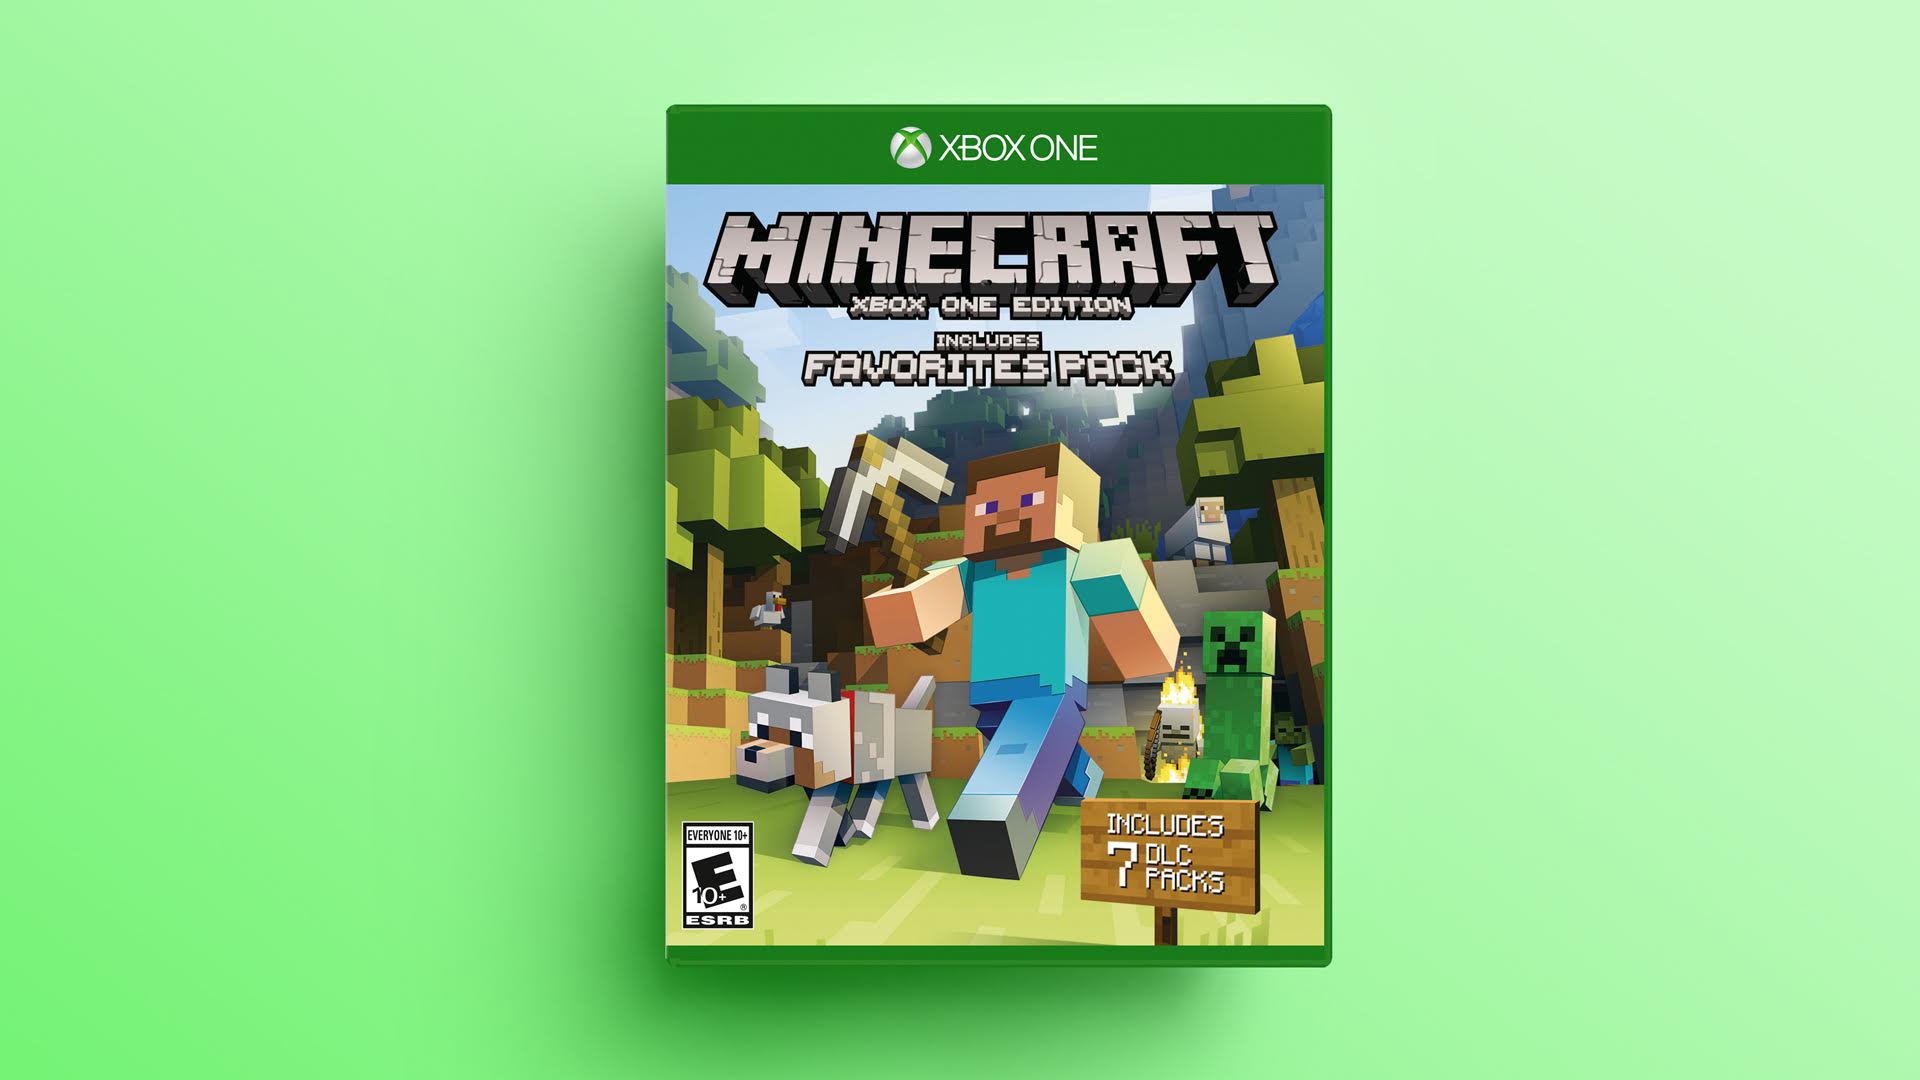 Minecraft: Xbox One Edition Favorites pack